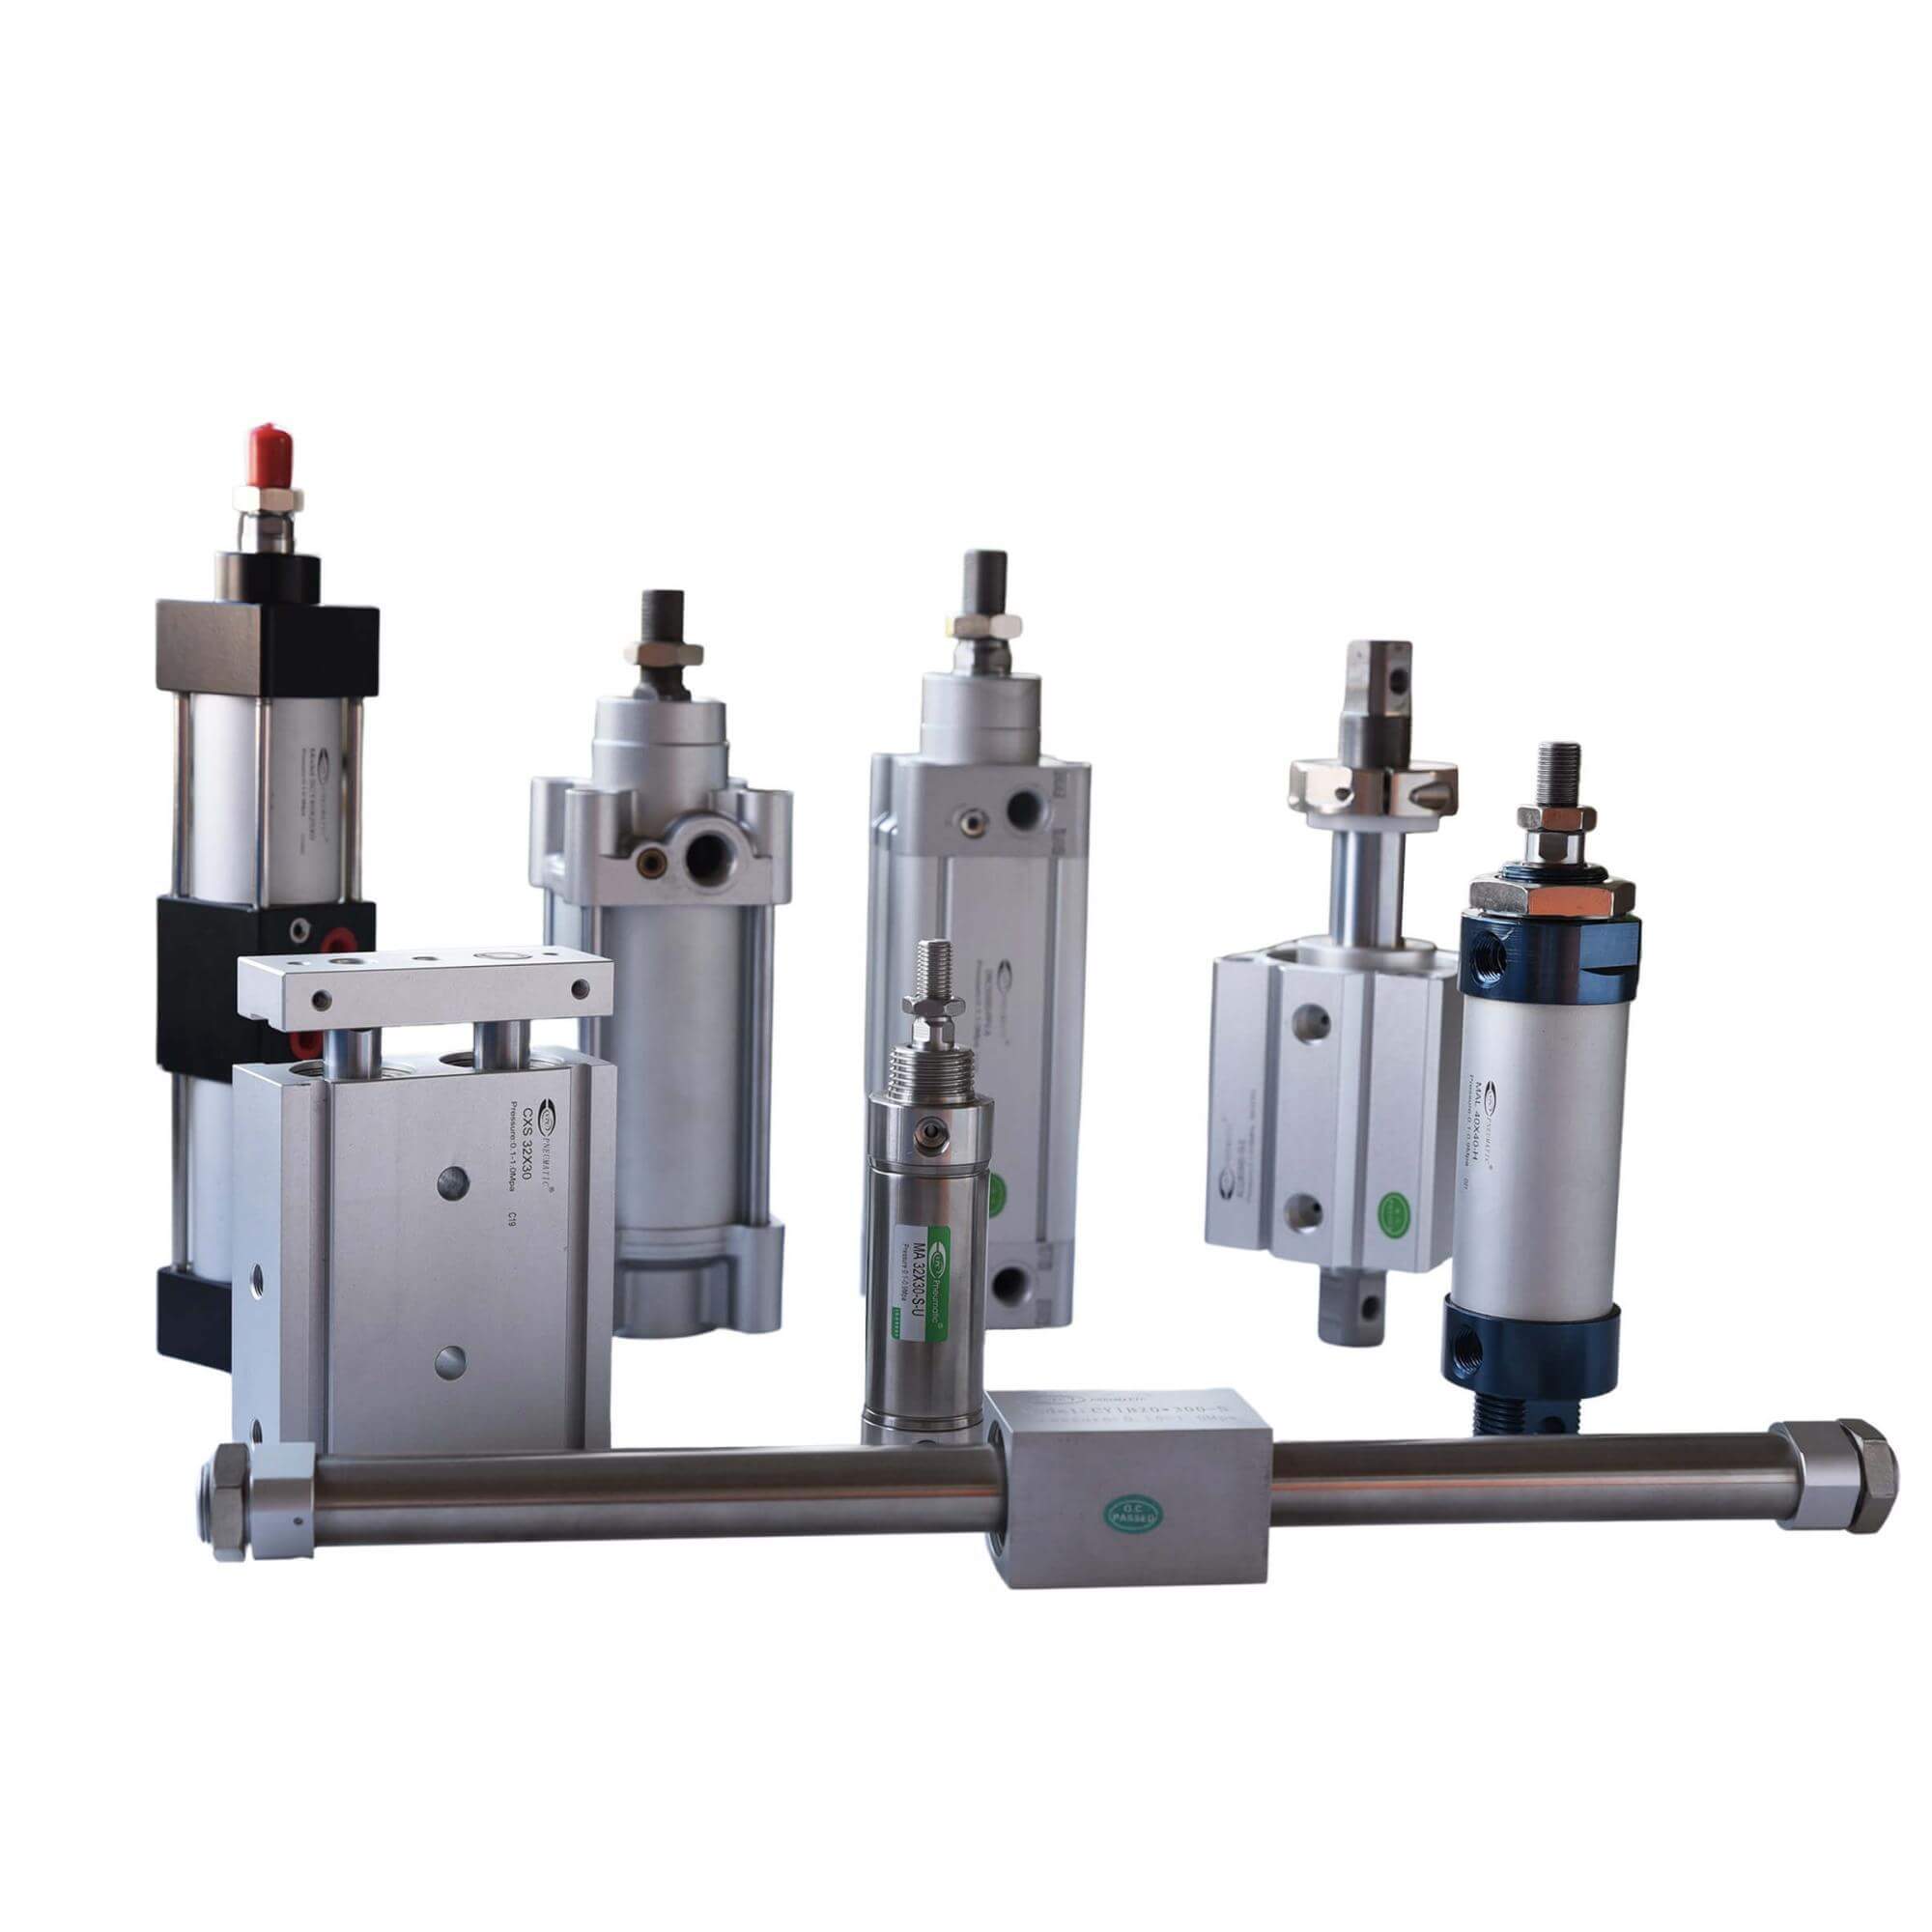 How many types of pneumatic cylinder